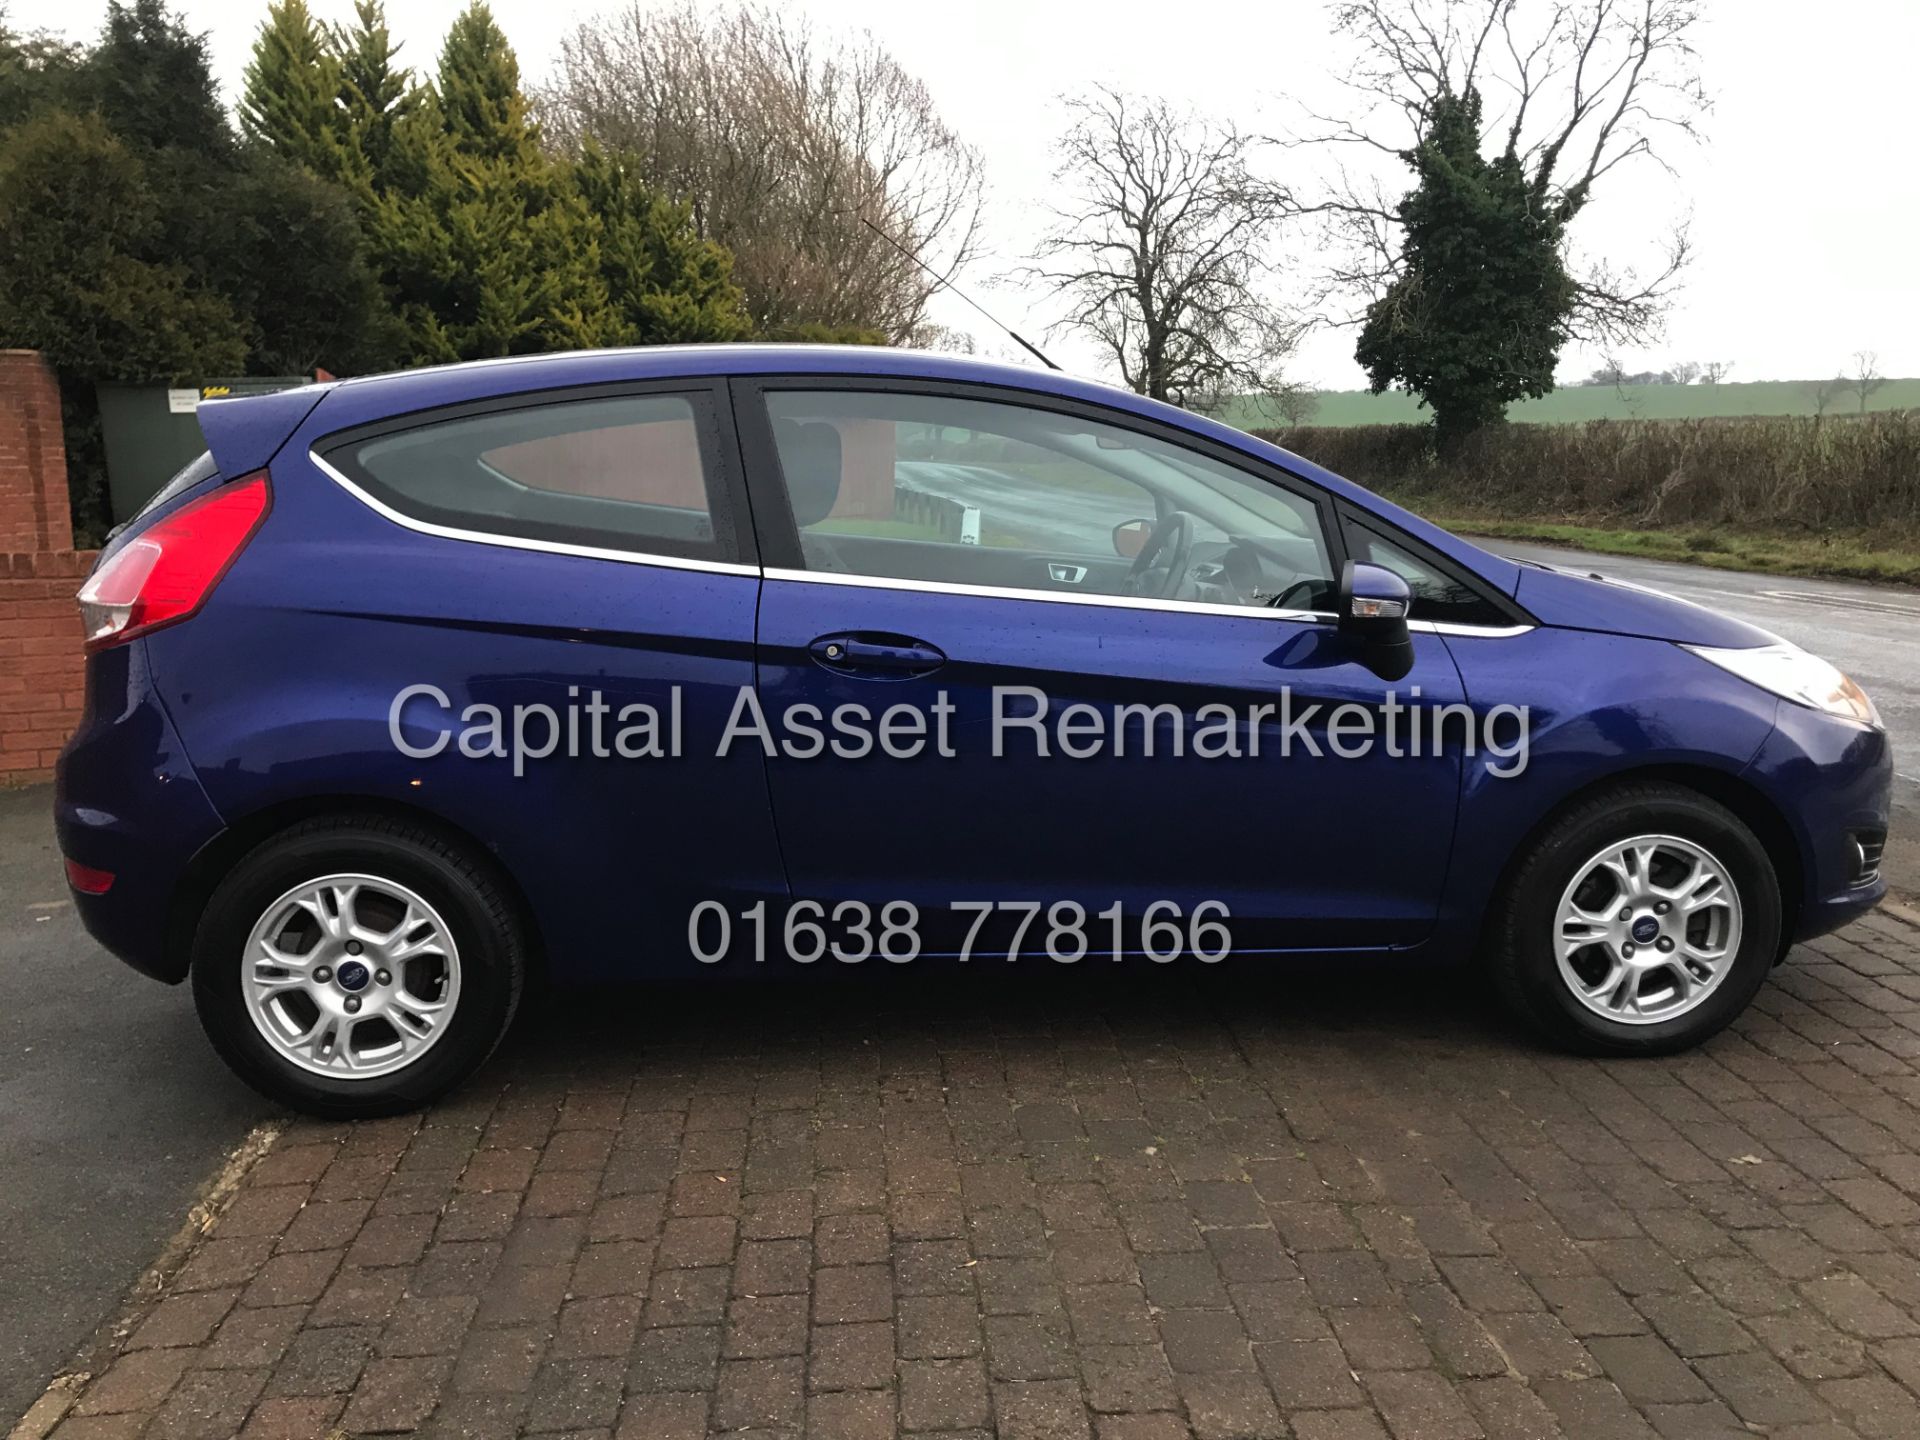 ON SALE FORD FIESTA 1.6TDCI "ZETEC ECONETIC" 1 OWNER FSH (2015 MODEL) ZERO £ ROAD TAX - AIR CON - Image 4 of 27